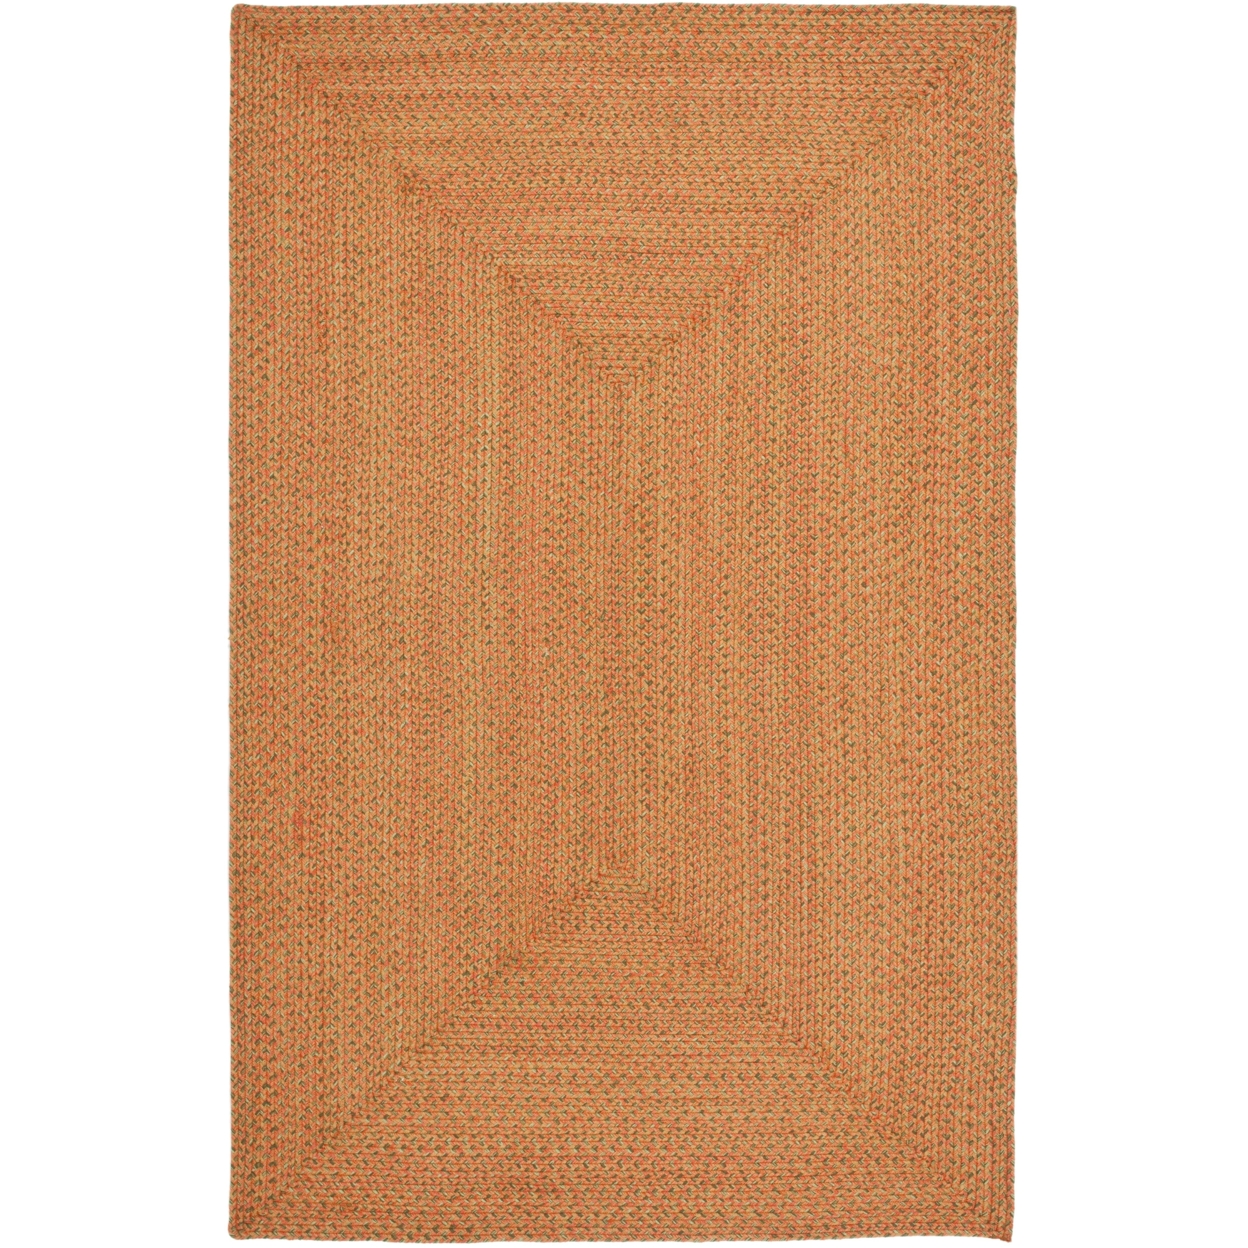 SAFAVIEH Braided Collection BRD166A Handwoven Multi Rug - 8' X 10' Oval